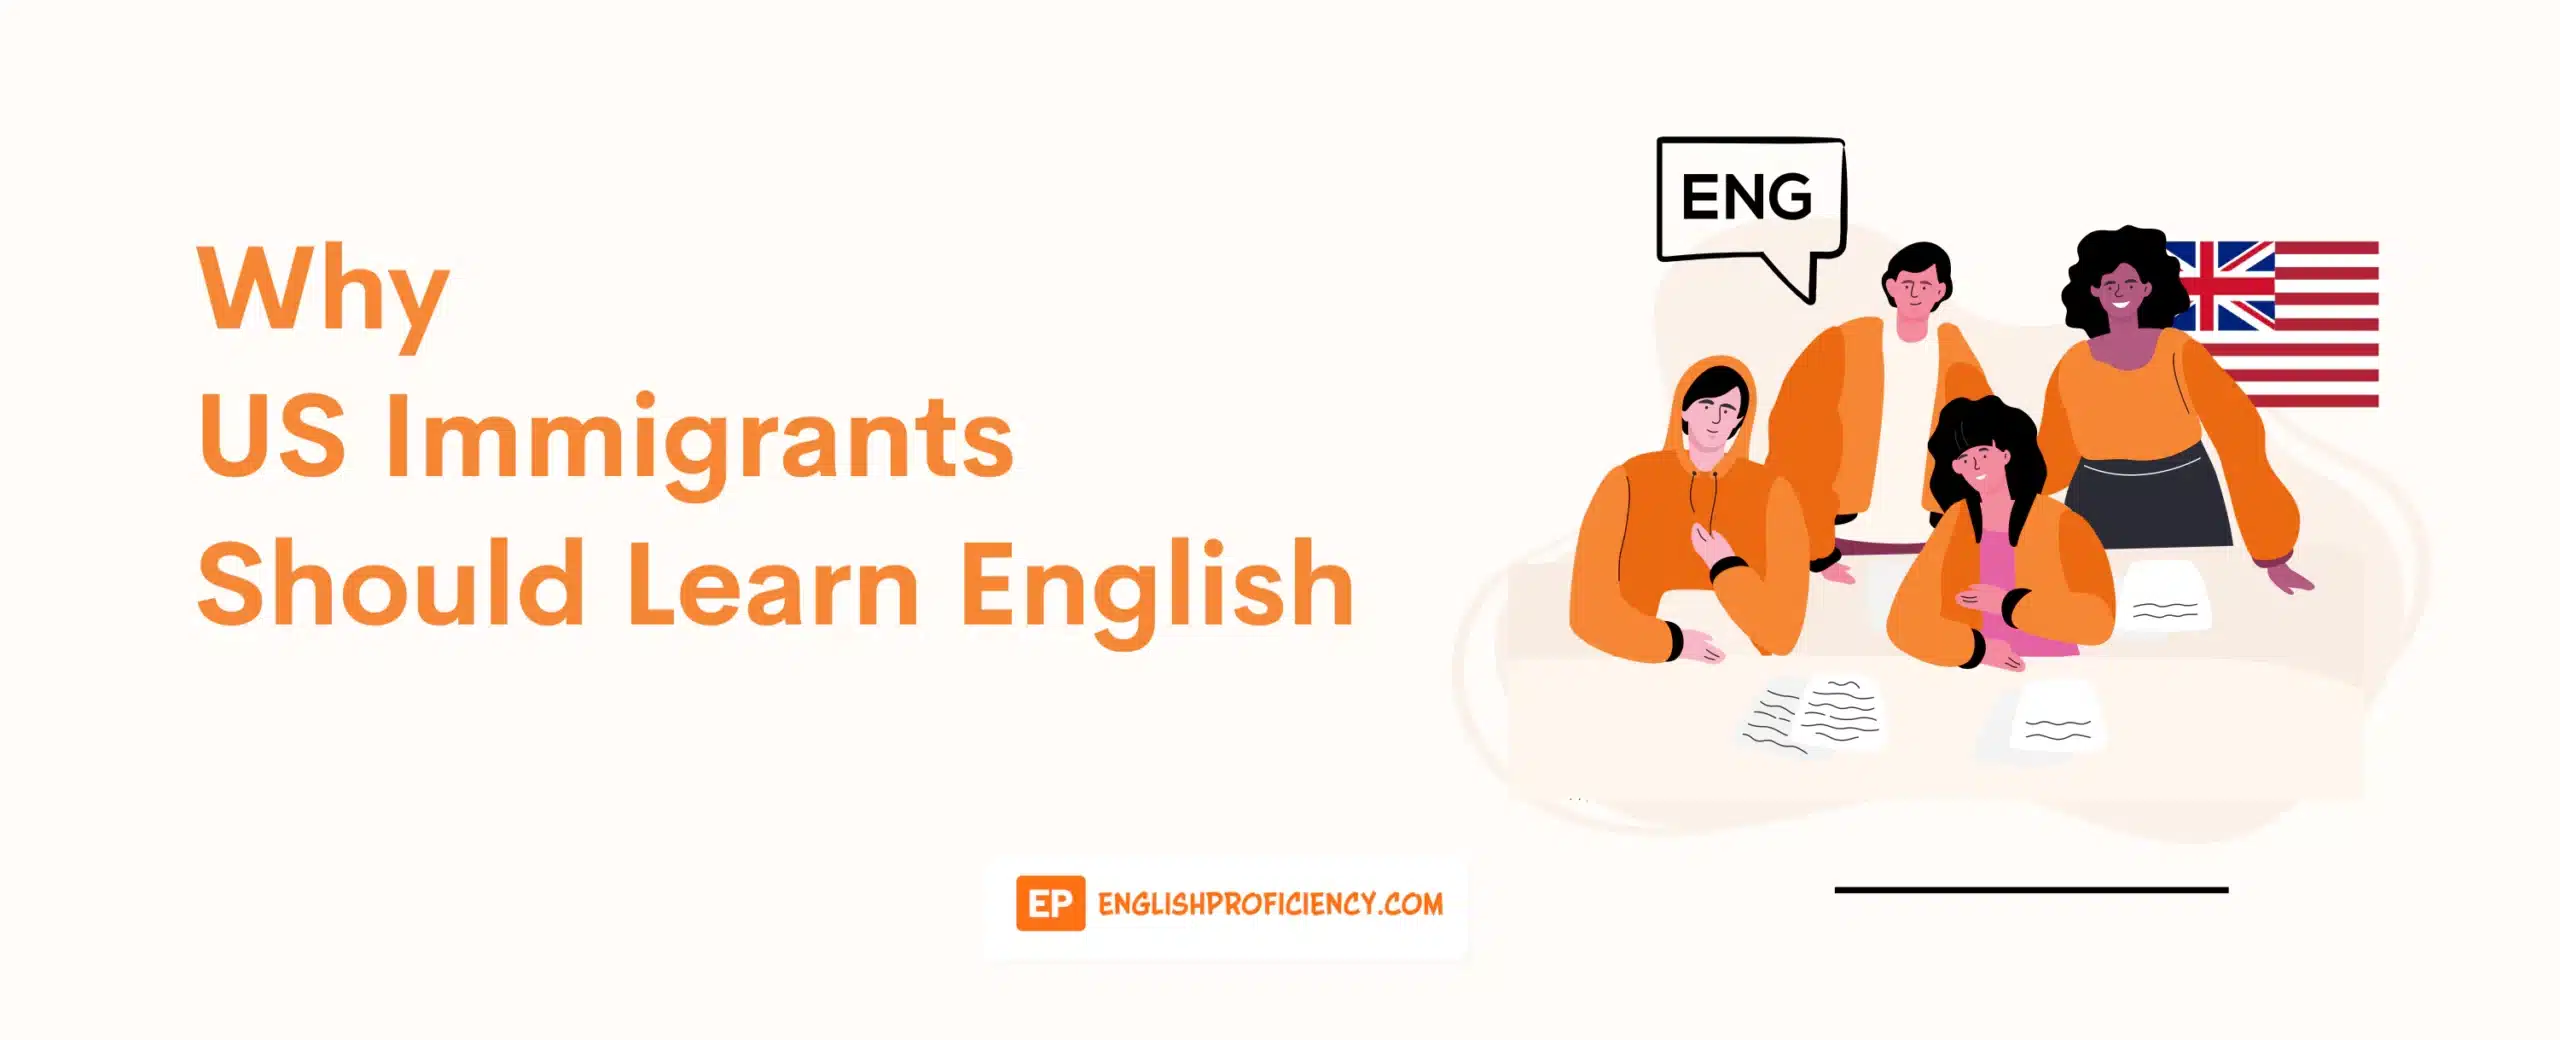 Why Should US Immigrants Learn English